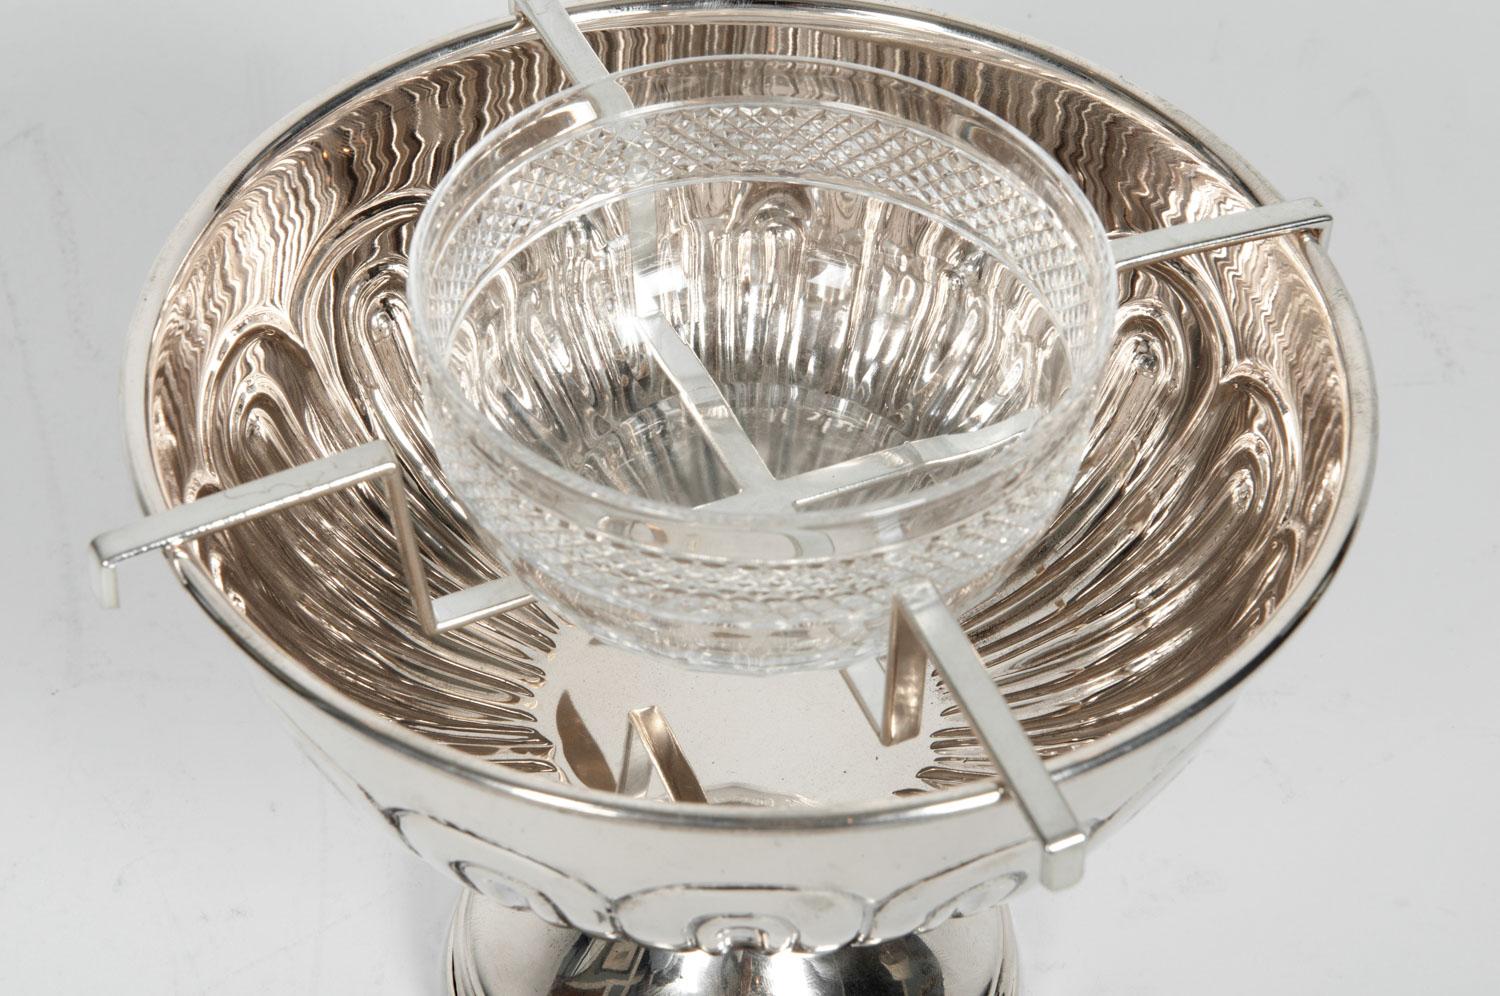 English sterling silver caviar dish service set. Each piece is in excellent condition, maker's mark undersigned. The weighted sterling bowl measure about 6 inches high x 8 inches diameter. The crystal Caviar container is 4.4 inches diameter x 2